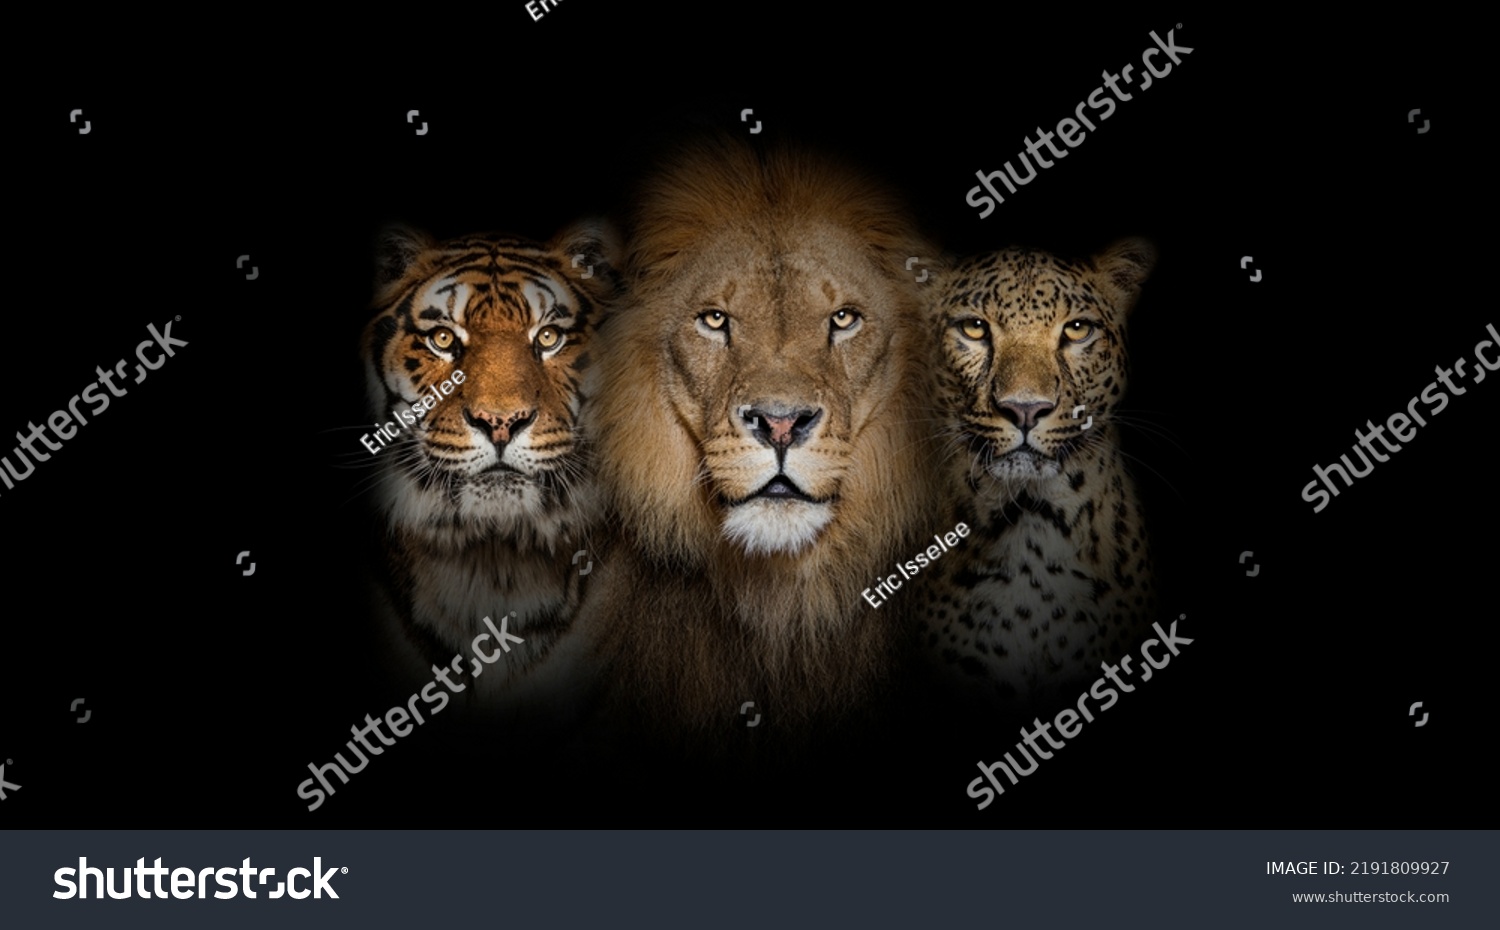 Big cats: Lion, tiger and spotted leopard, together on a black background #2191809927